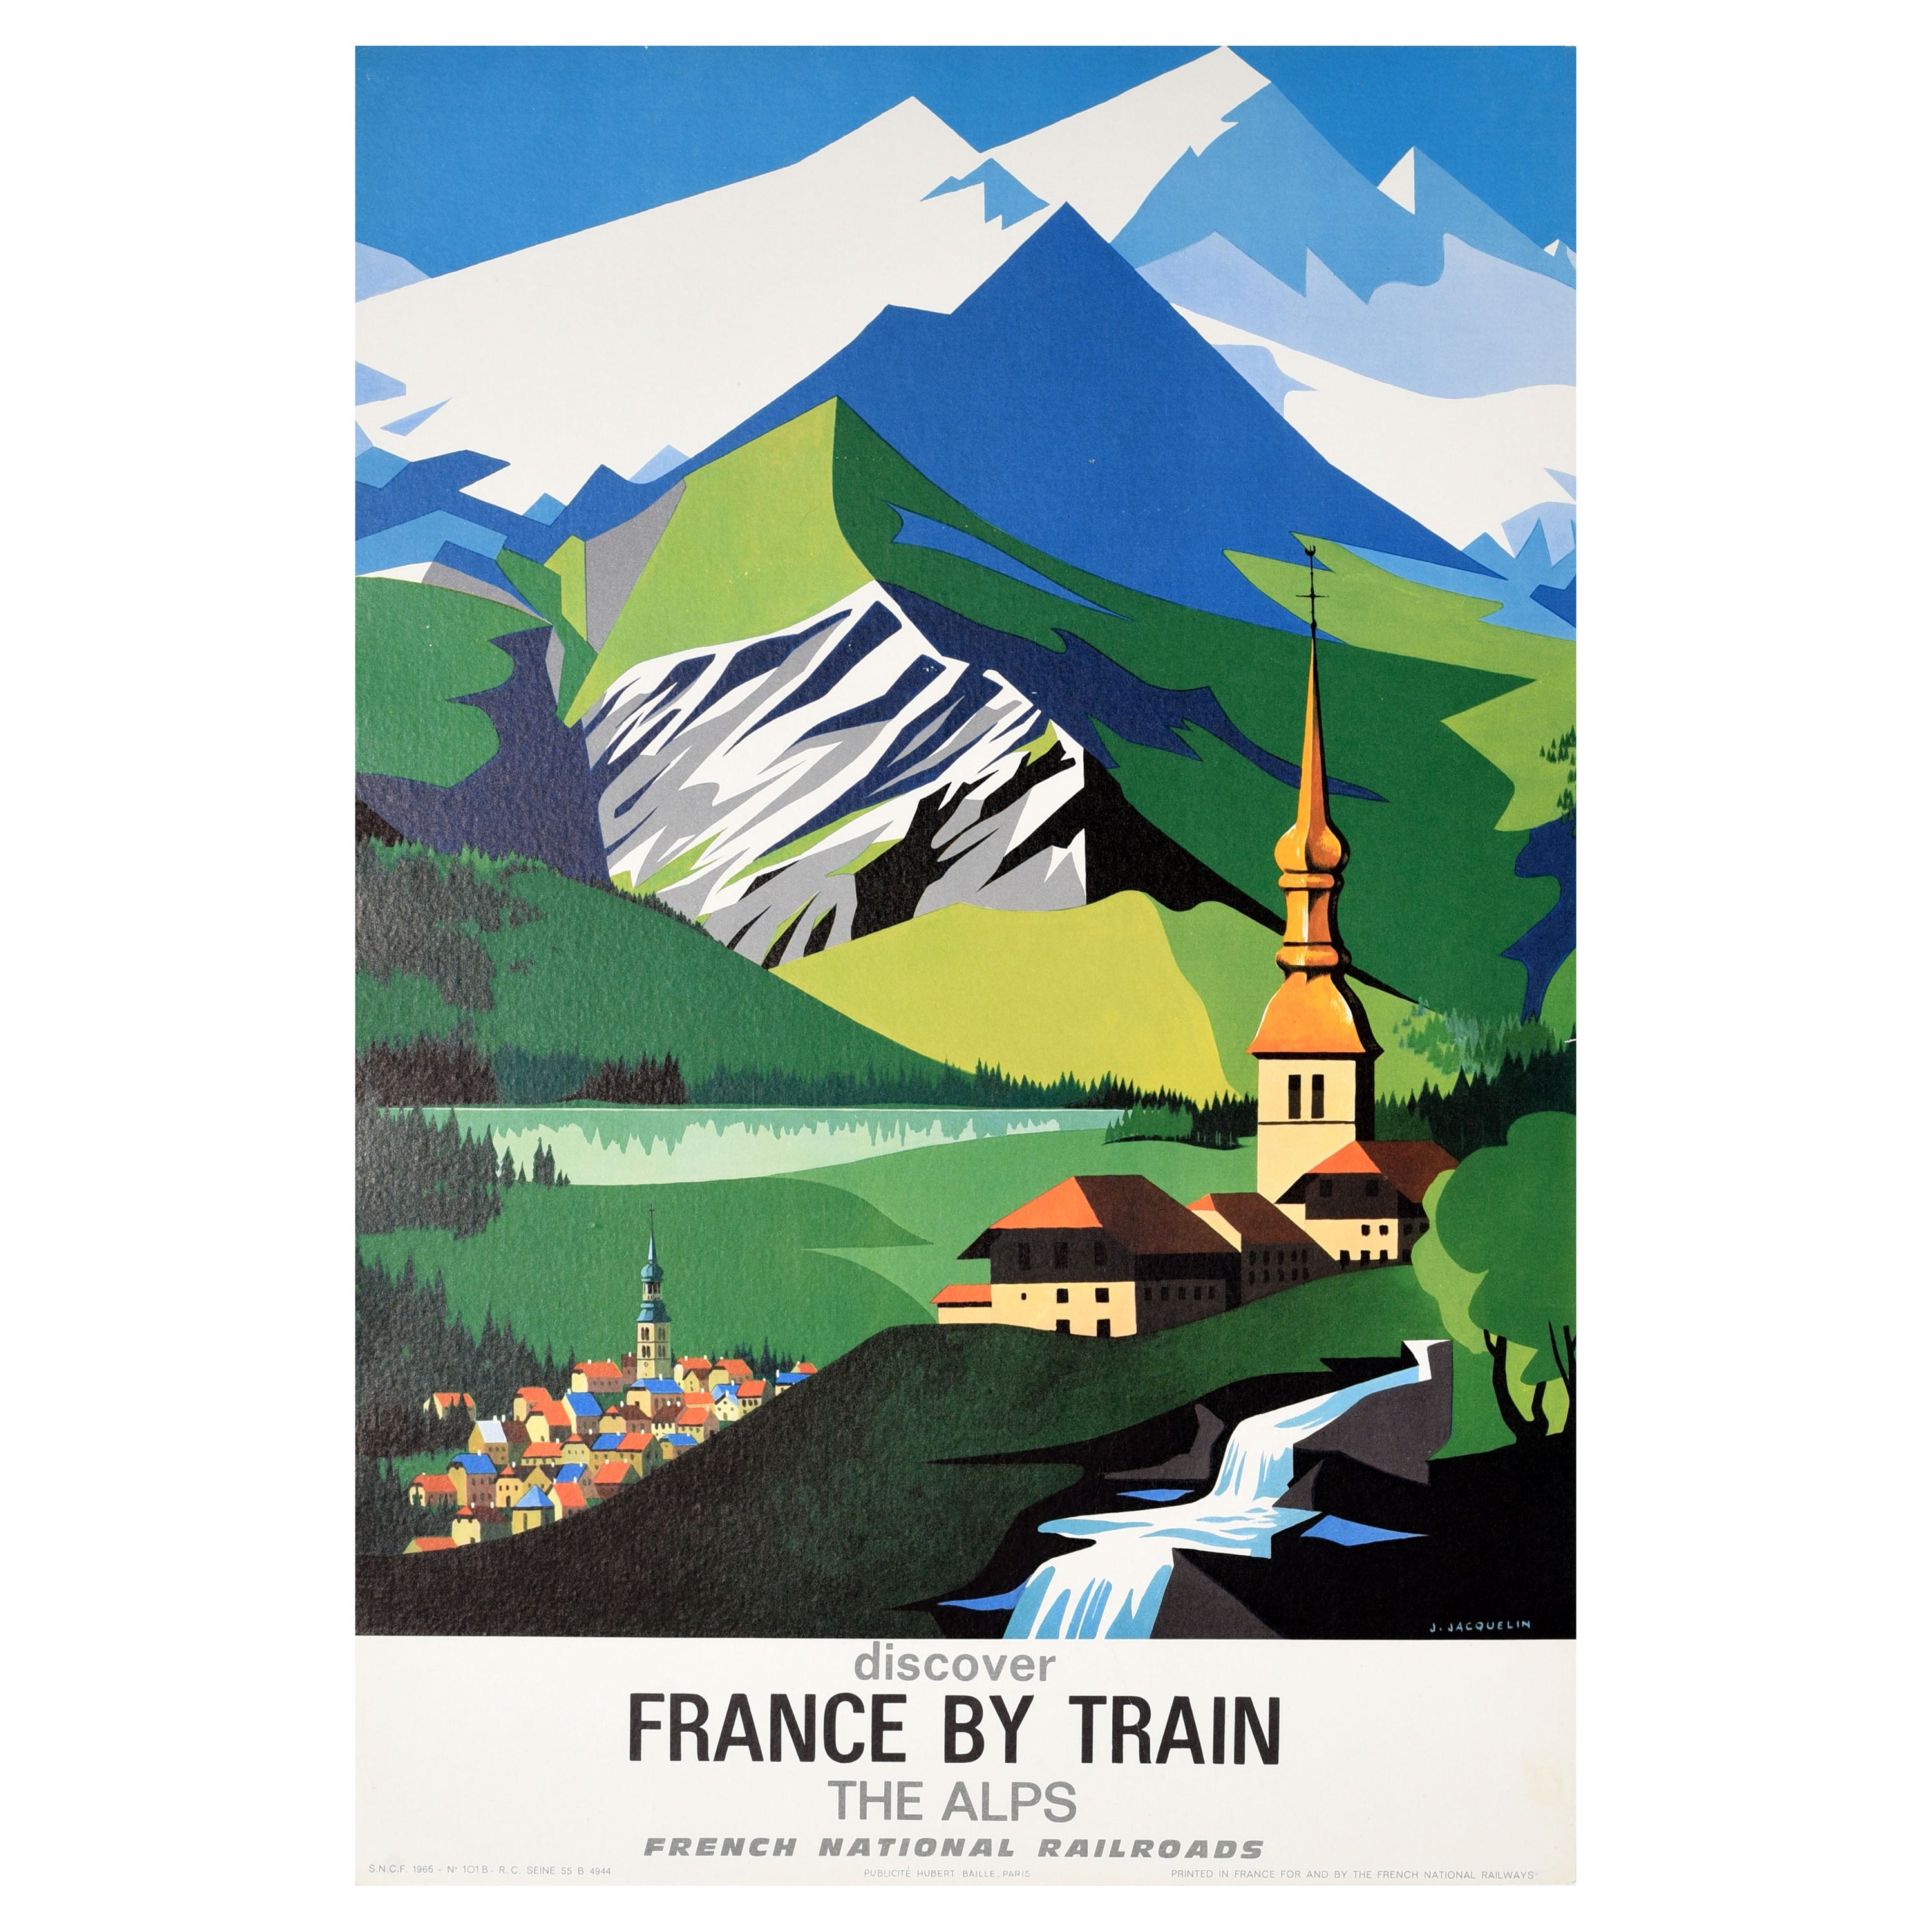 Original Vintage French Railway Travel Poster Discover France By Train The Alps